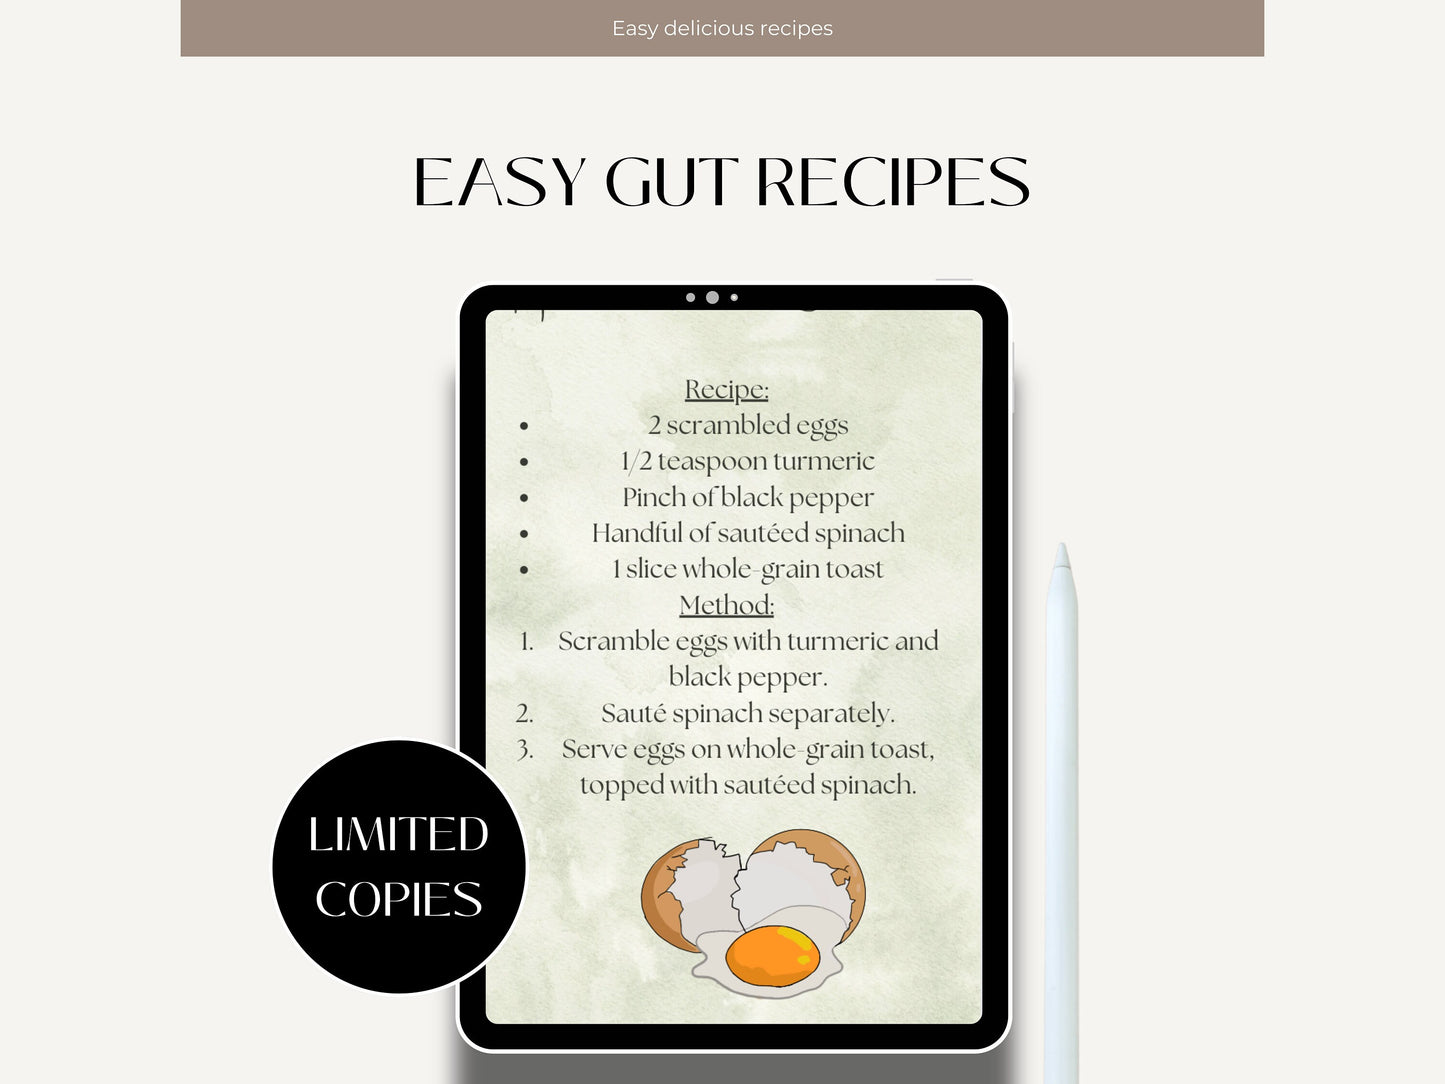 Meal plans for Gut Health perfect for Personal trainers and fitness coaches. Easy recipes, Gut health content, Breakfast recipes ideas, PDFS